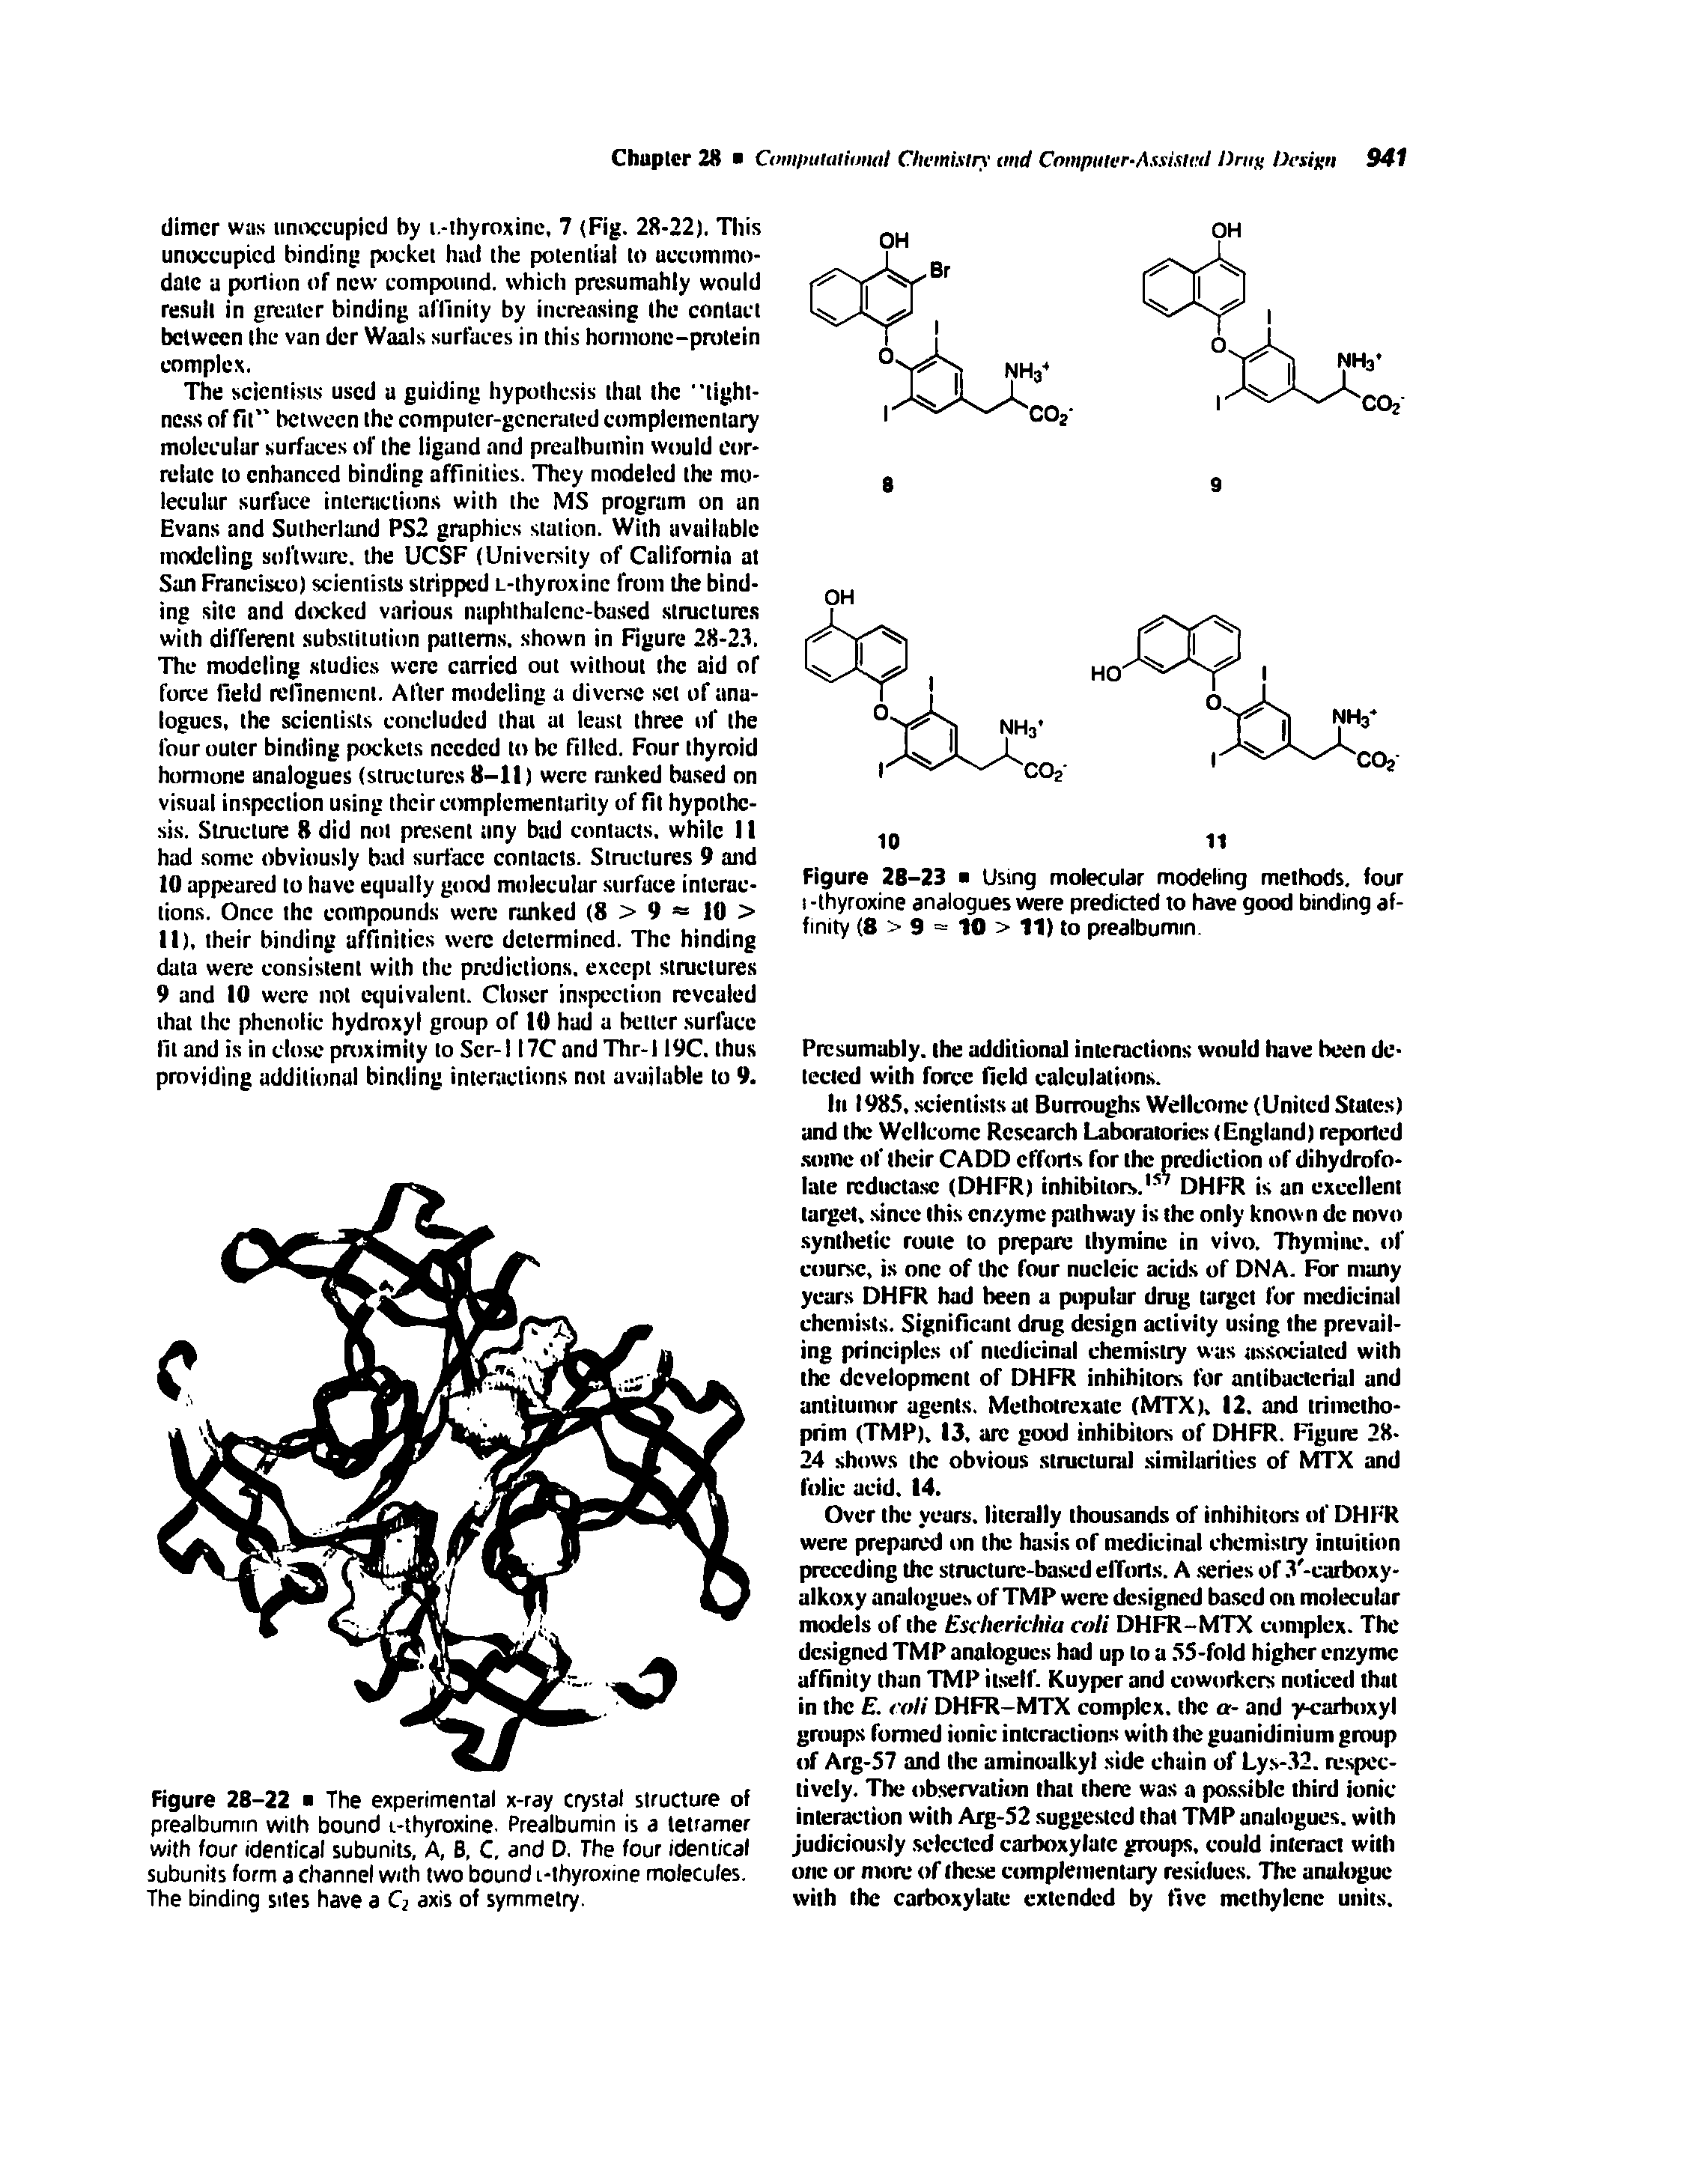 Figure 28-22 The experimental x-ray crystal structure of prealbumin with bound i-thyroxine. Prealbumin is a letramer with four identical subunits, A, B, C, and D, The four identical subunits form a channel with two bound i-thyroxine molecules. The binding sites have a C2 axis of symmetry.